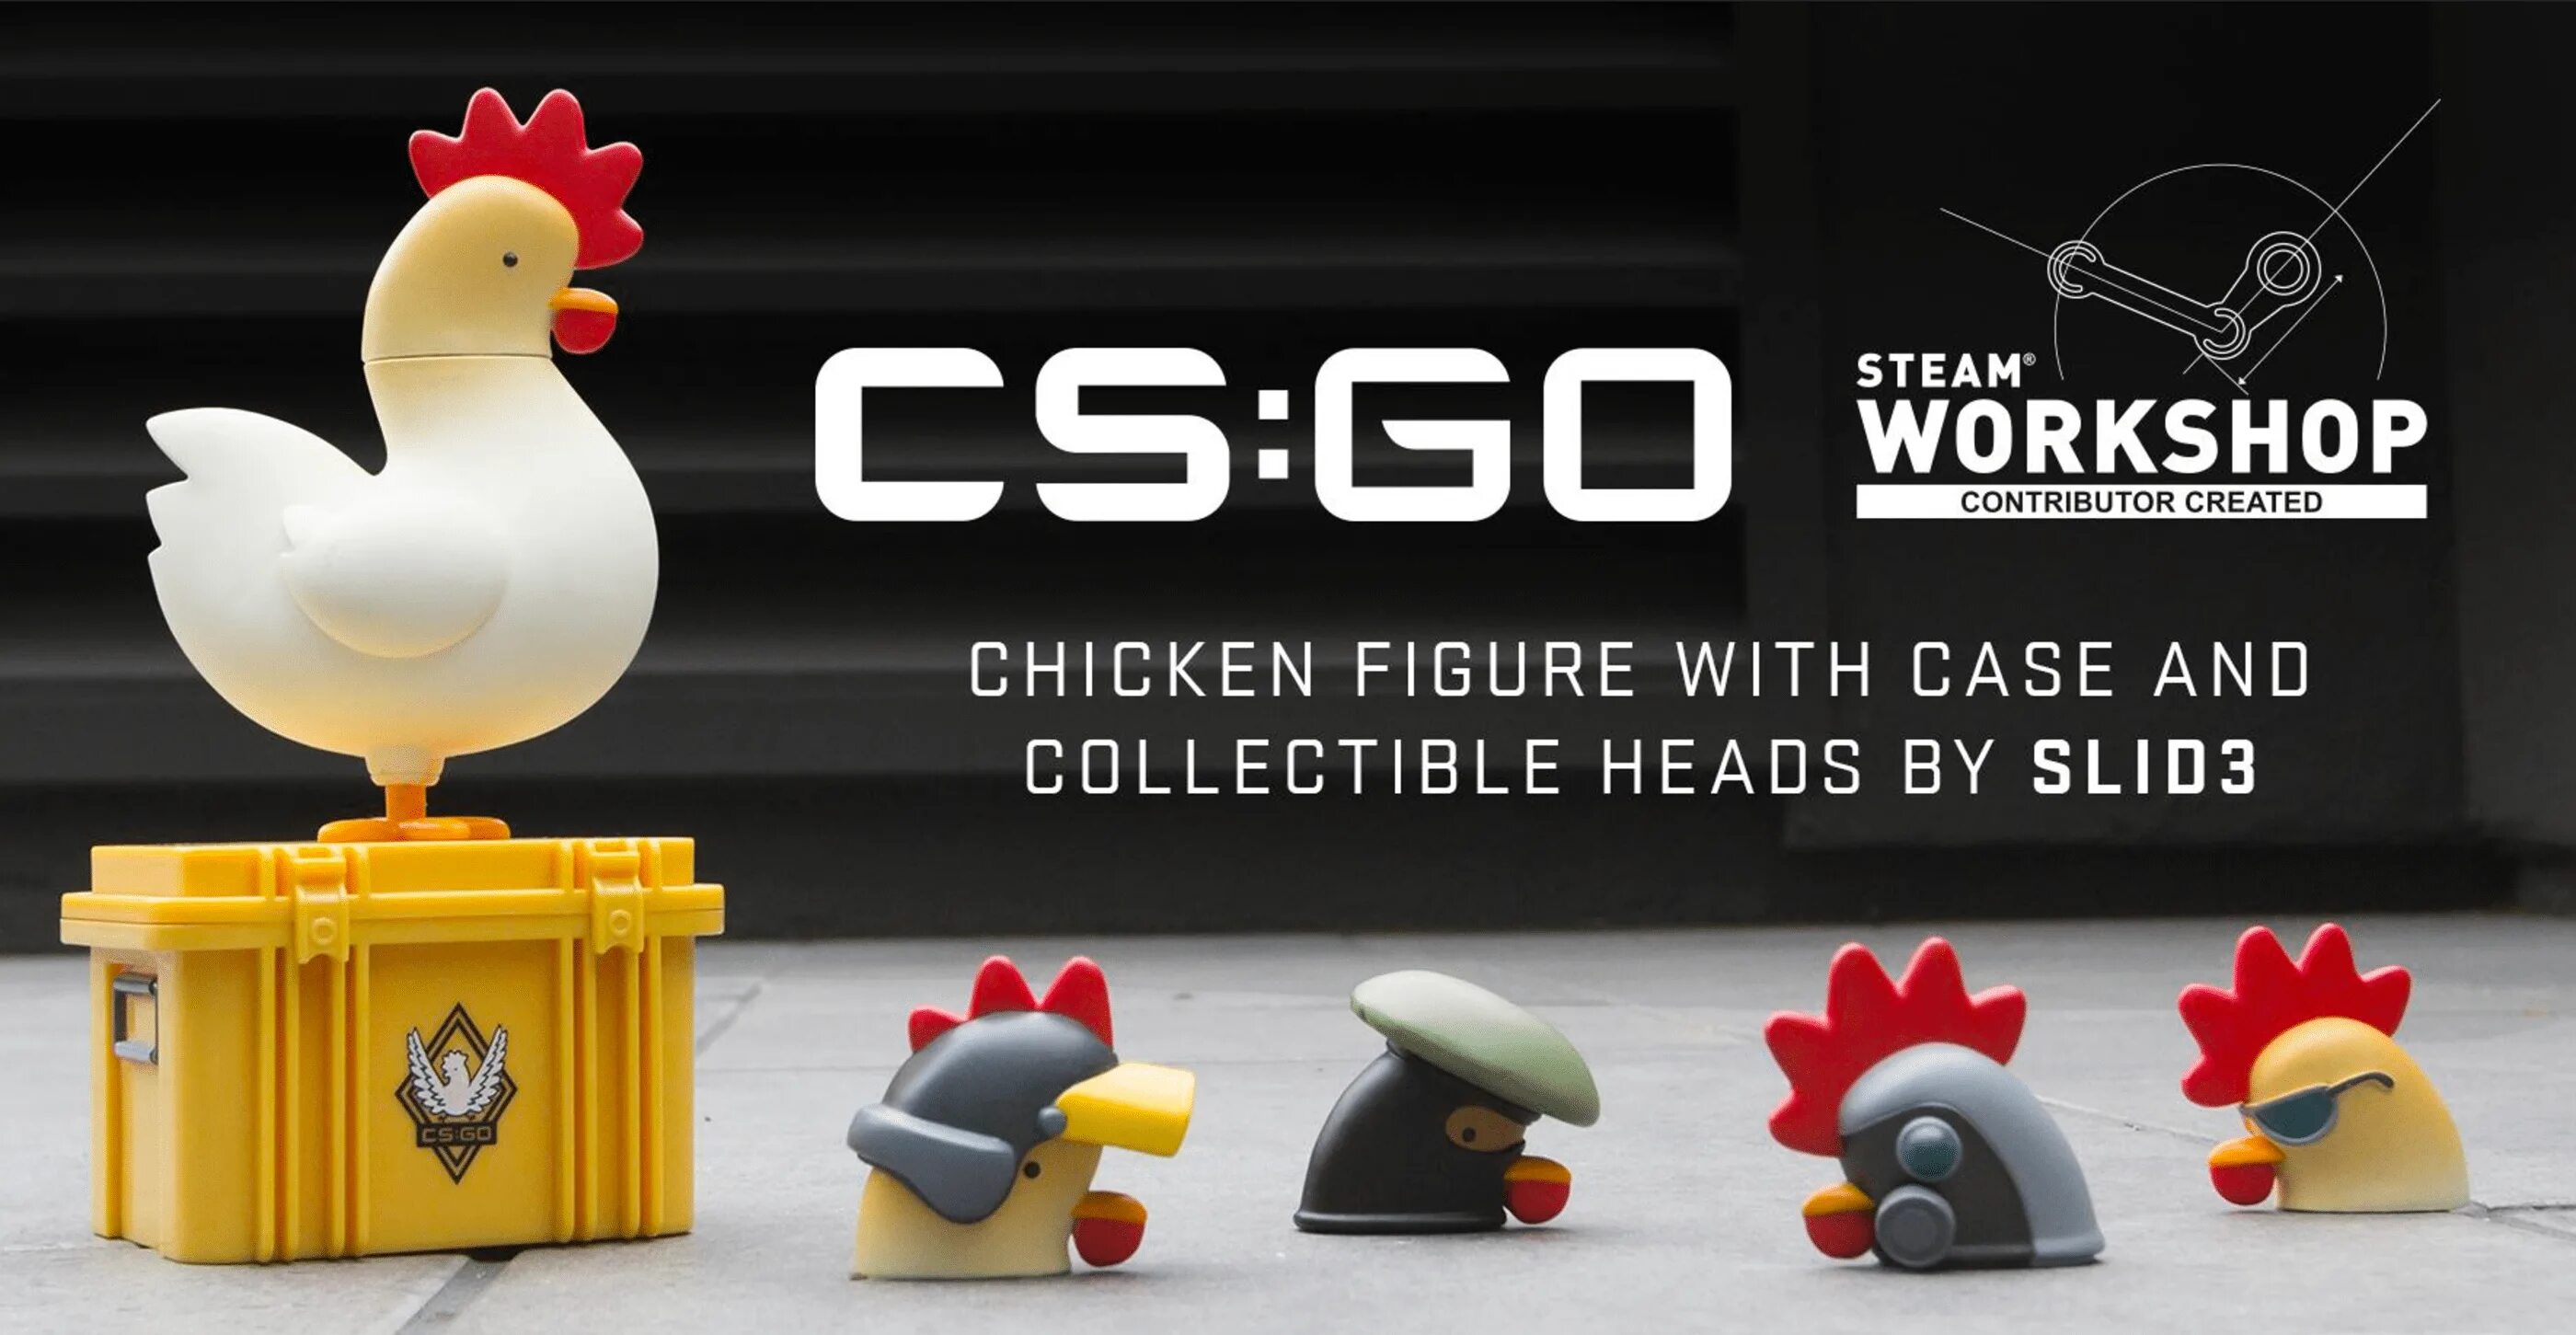 Chicken to go. КС го Чикен. Курица CSGO. Counter-Strike: Global Offensive курица. Курица КС го арт.